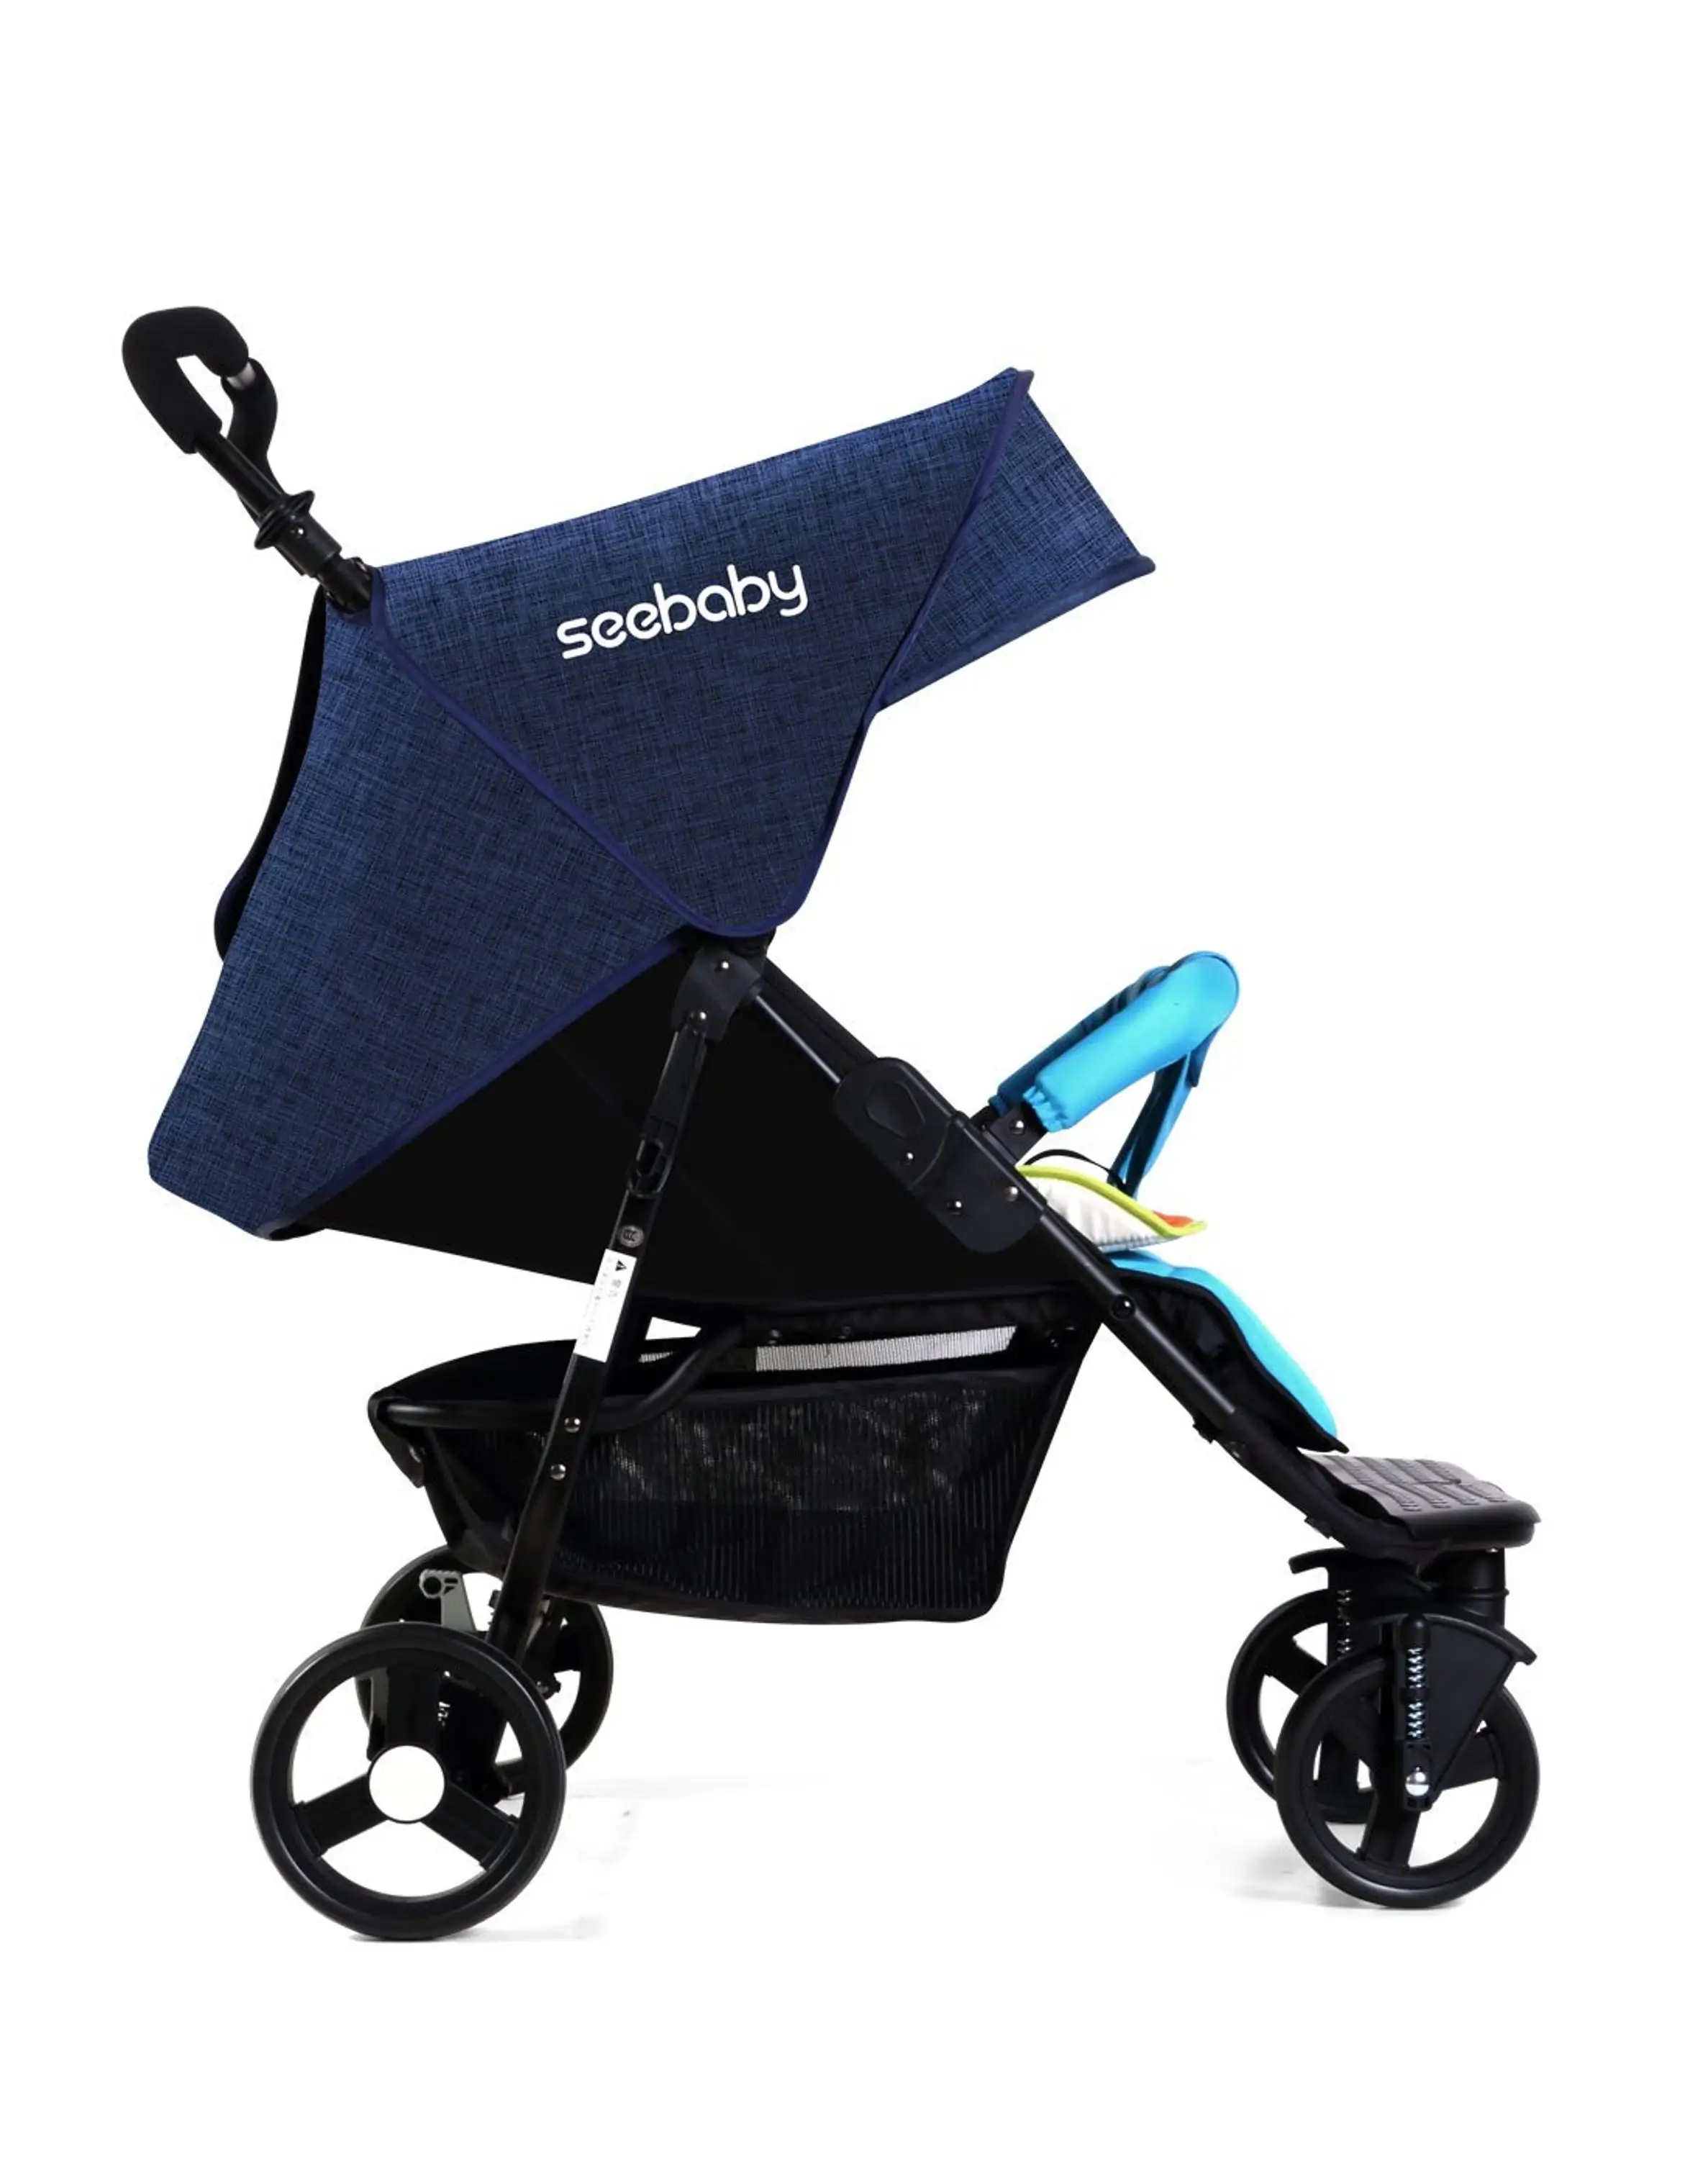 seebaby double stroller t22 review